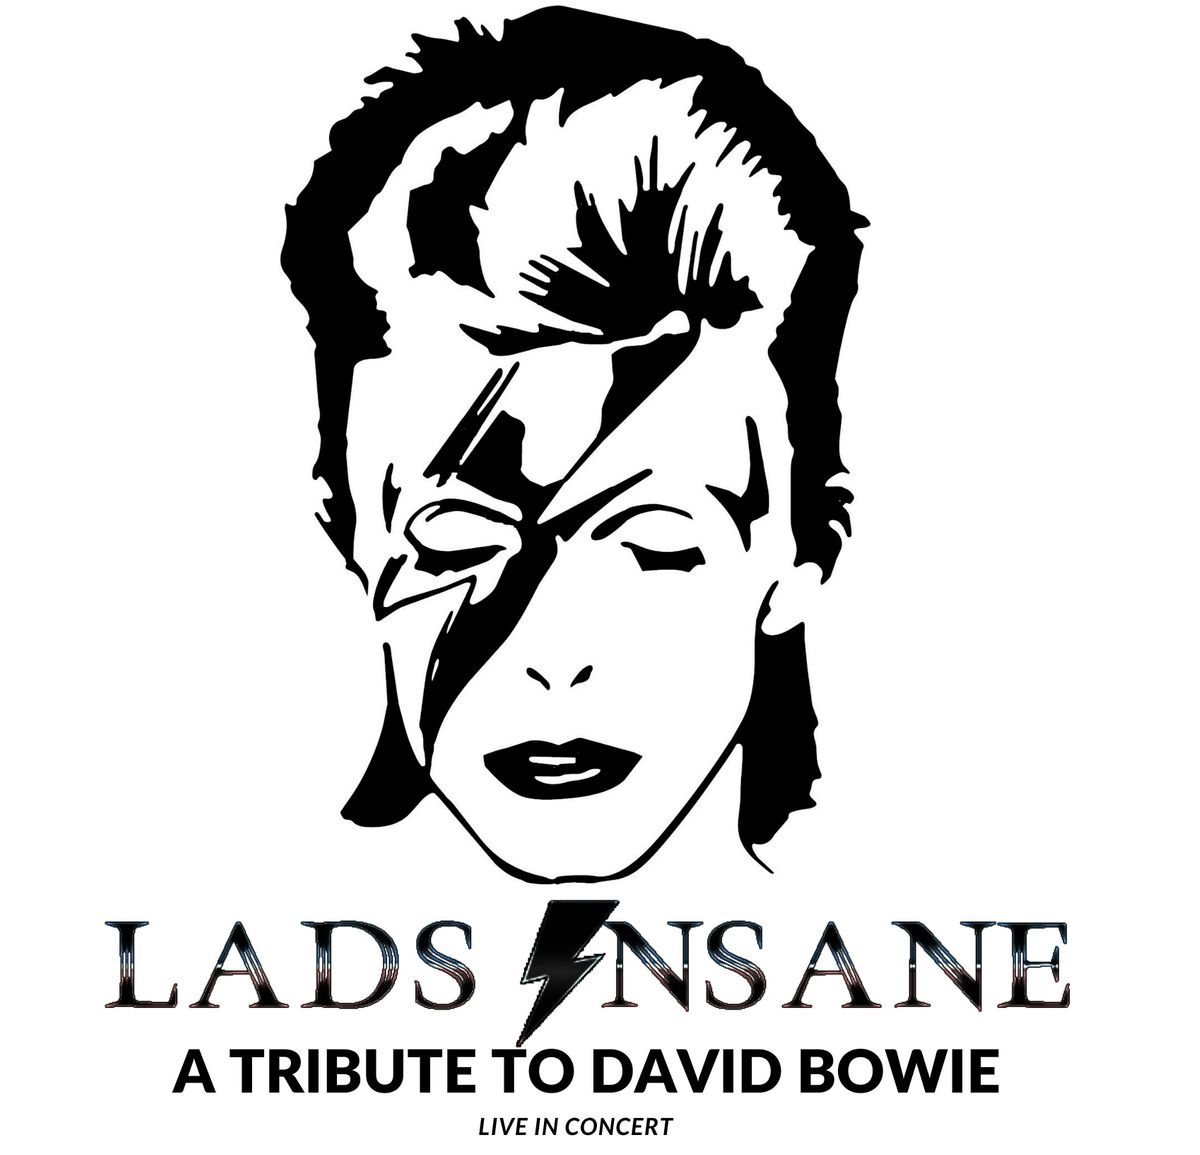 A tribute to David Bowie - Live in Concert feat: Lads Insane